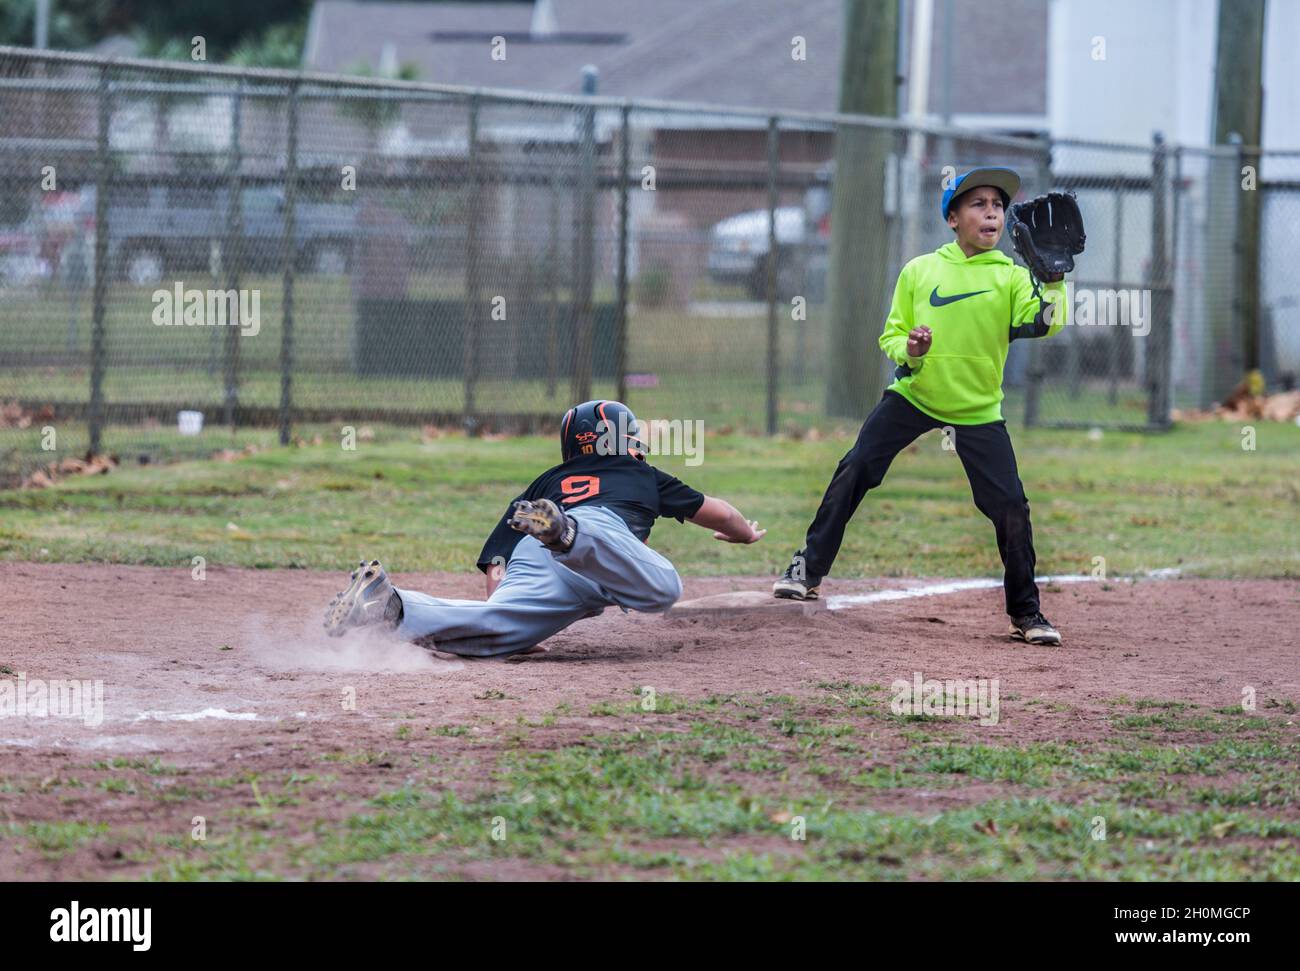 Young pre-teen male diving back to third base while playing baseball in uniform Stock Photo